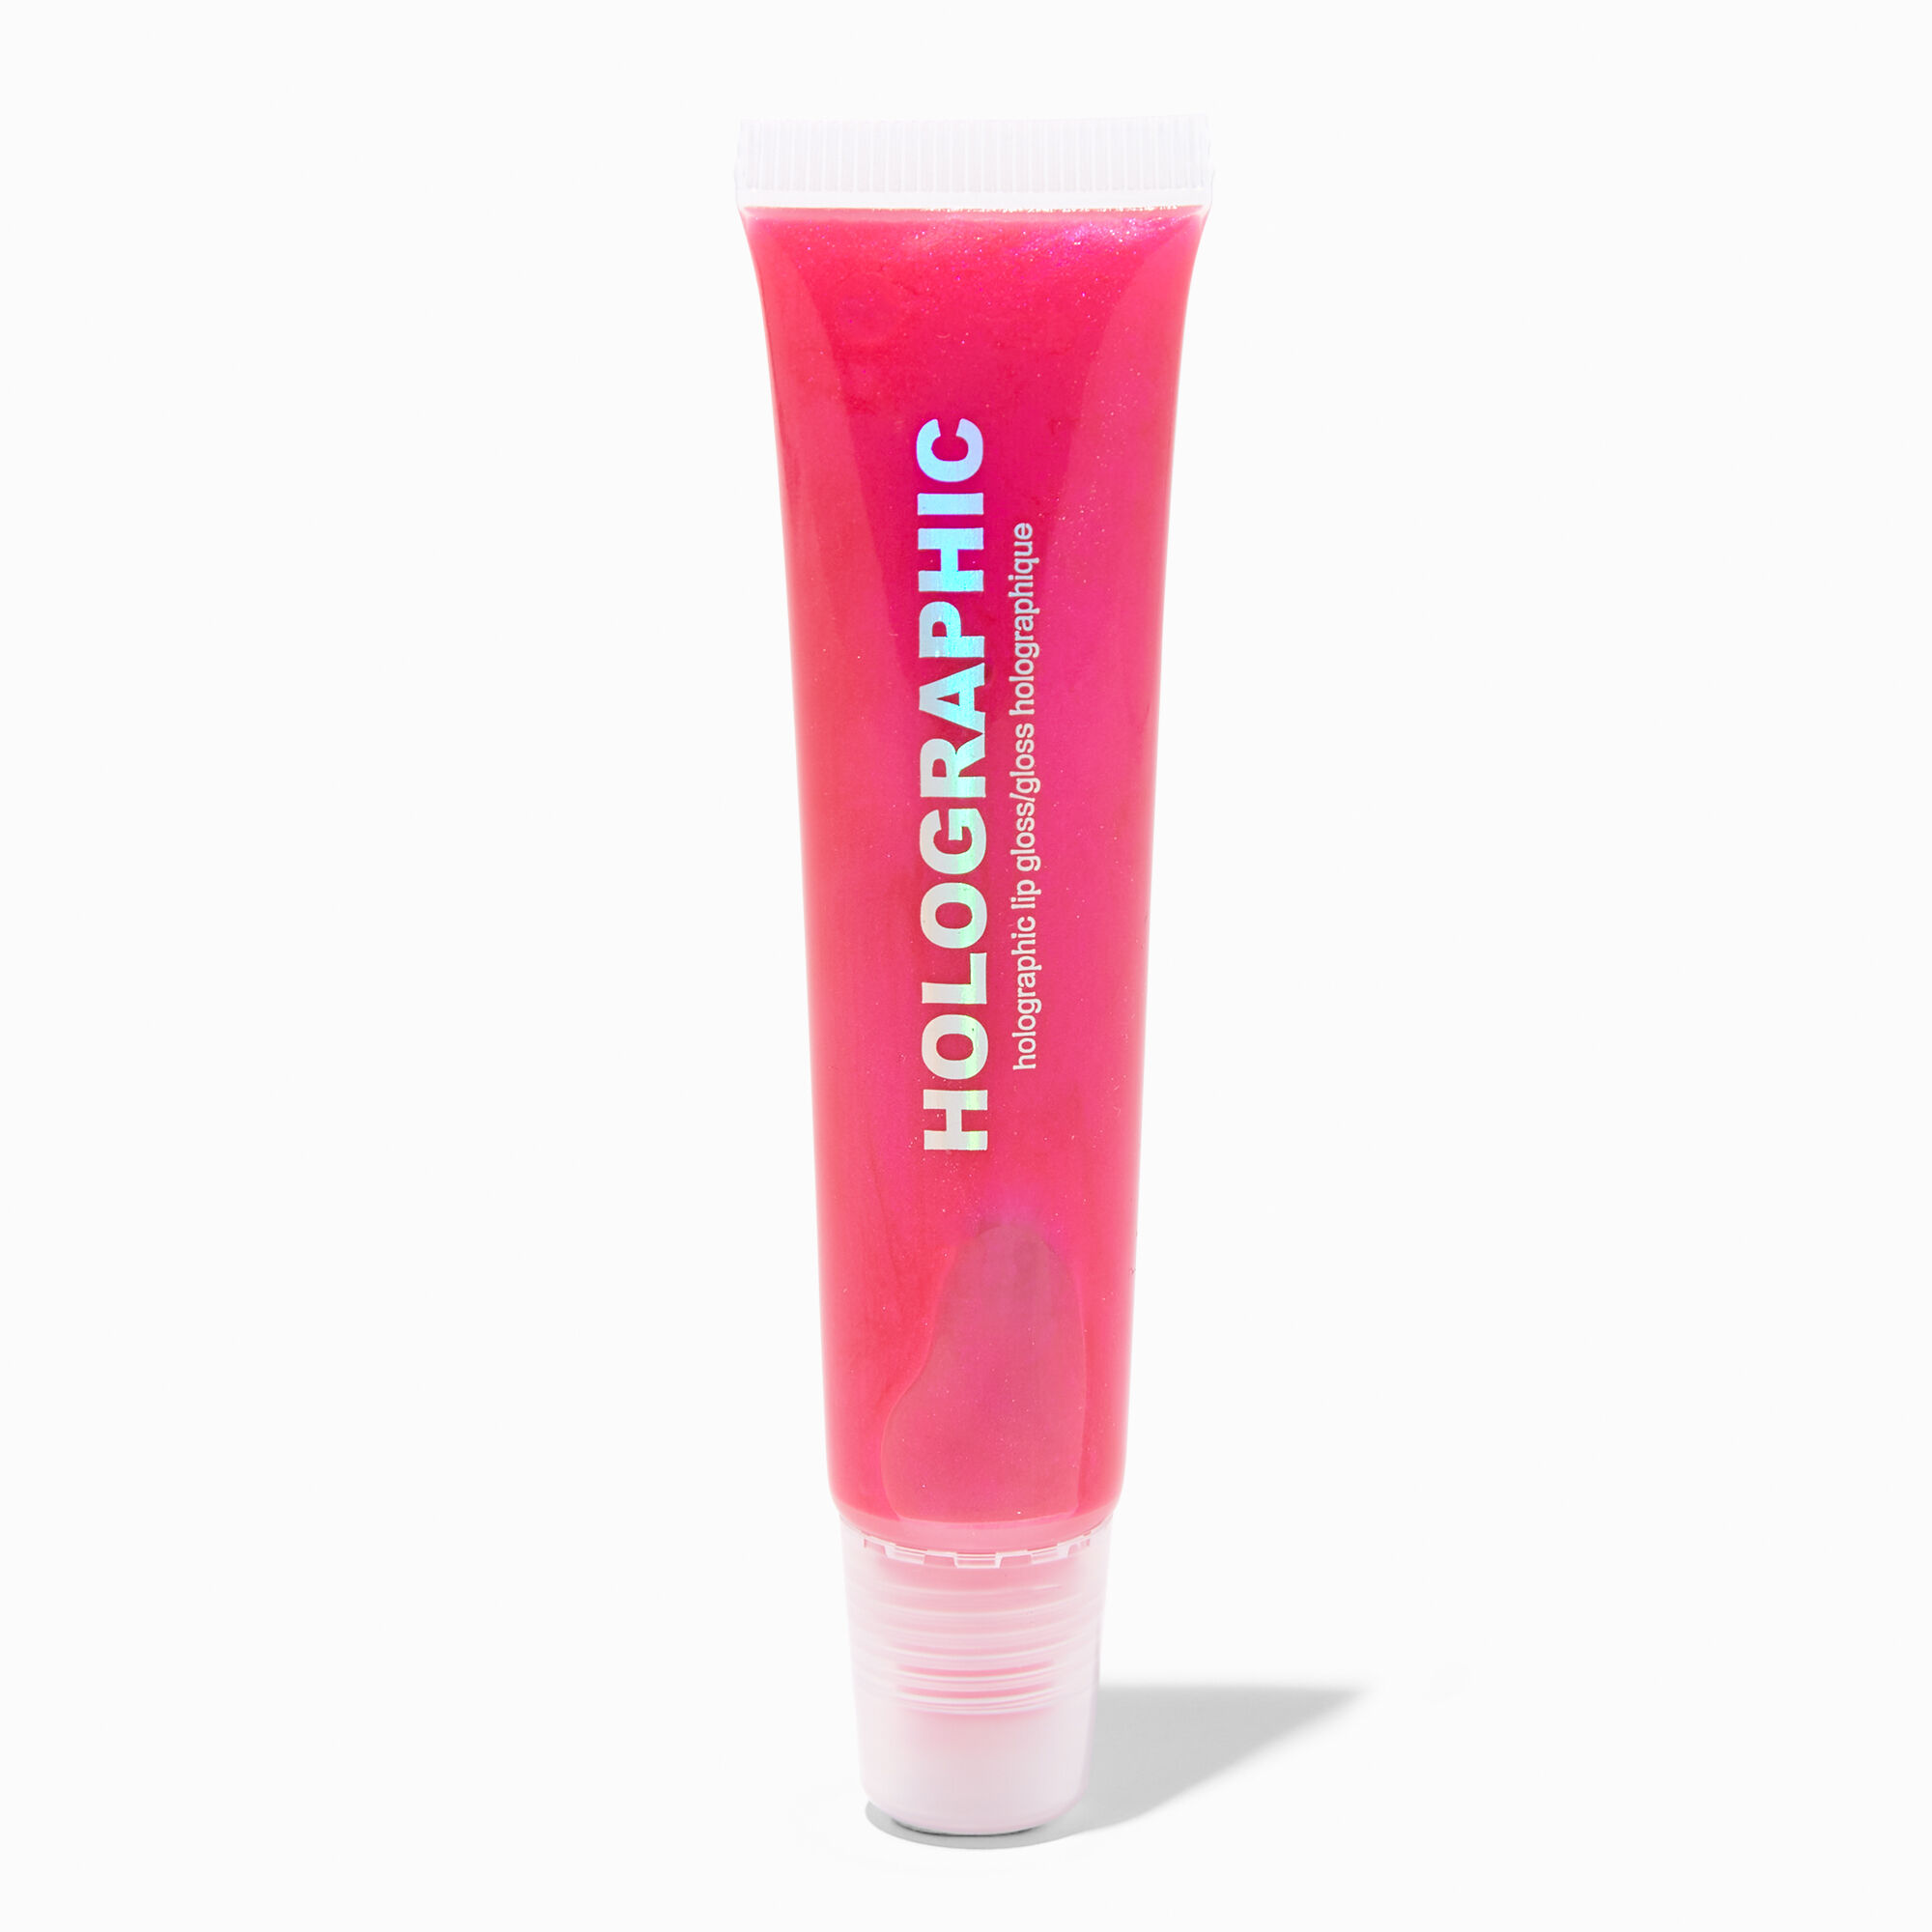 View Claires Holographic Hot Glossy Lip Gloss Tube Pink information